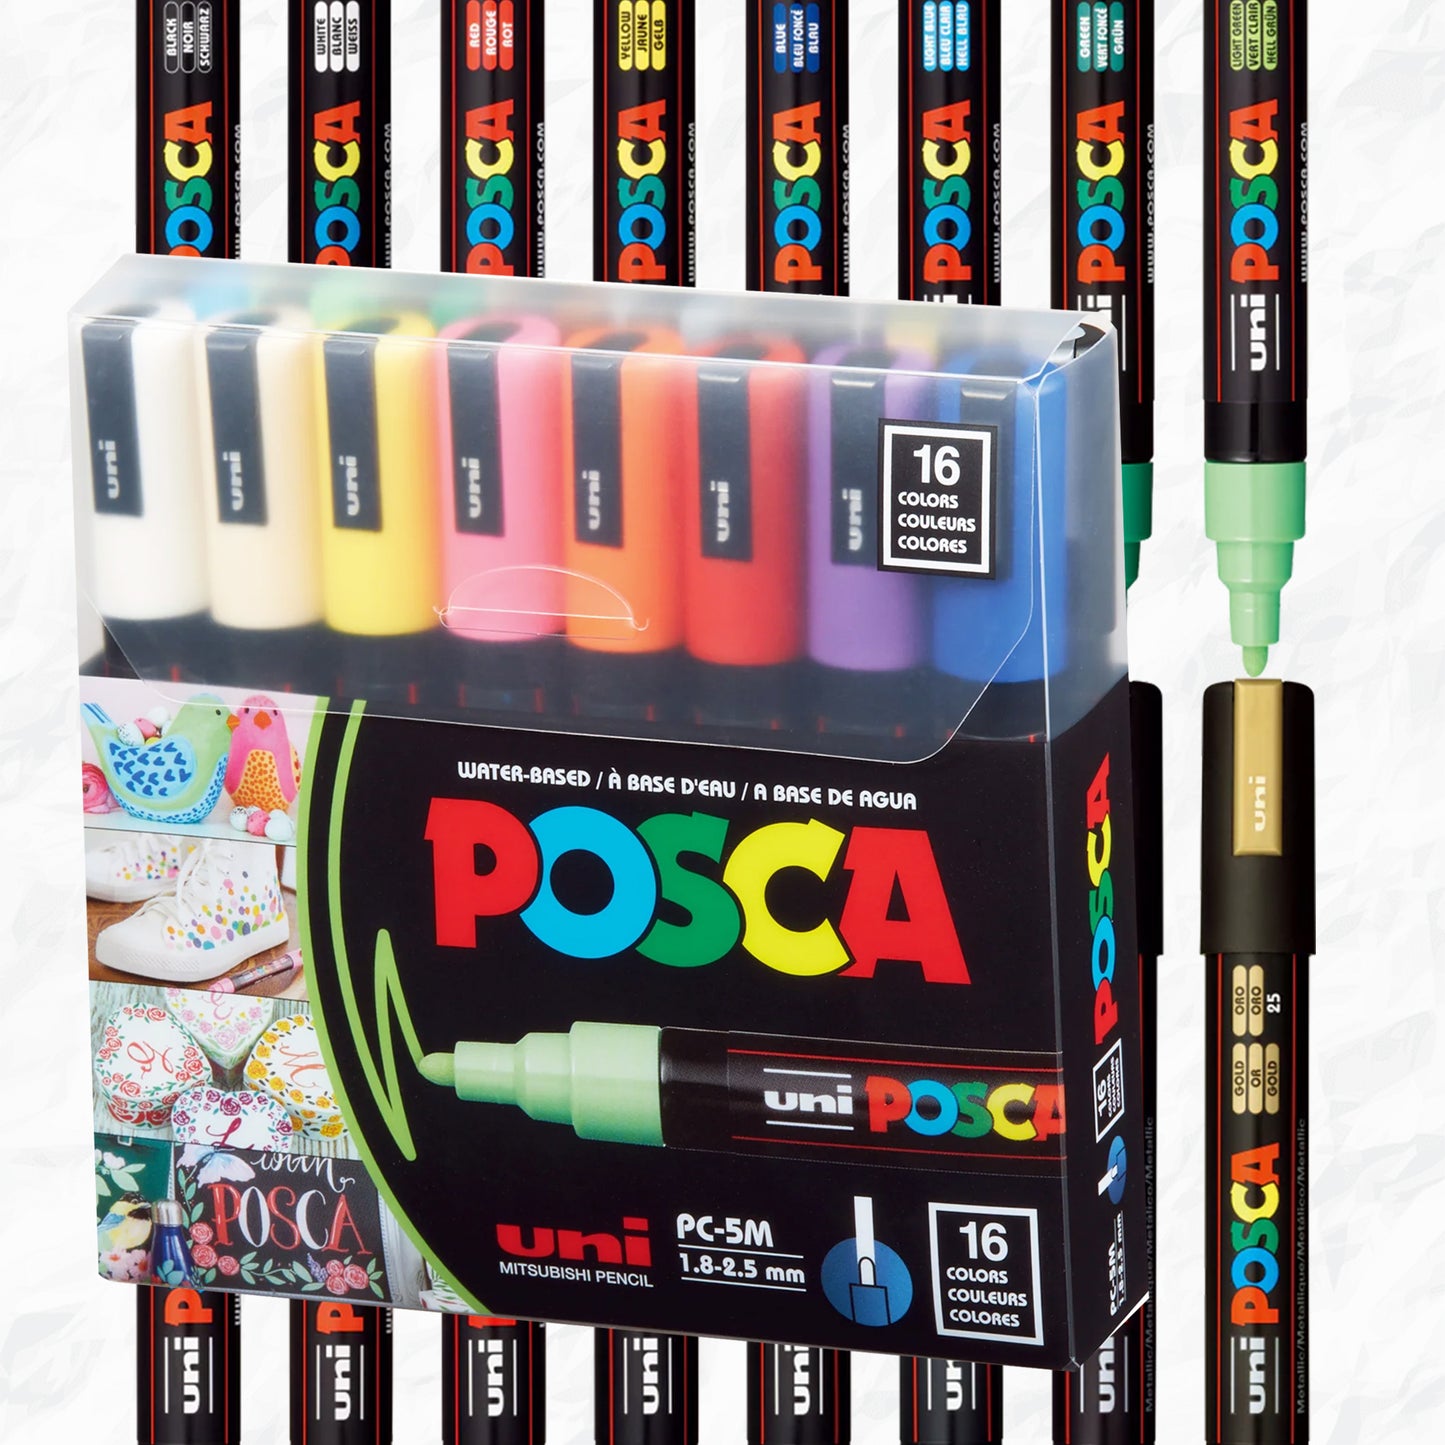 POSCA water-based art paint markers, size 5M medium round, sixteen piece pack in primary colors.